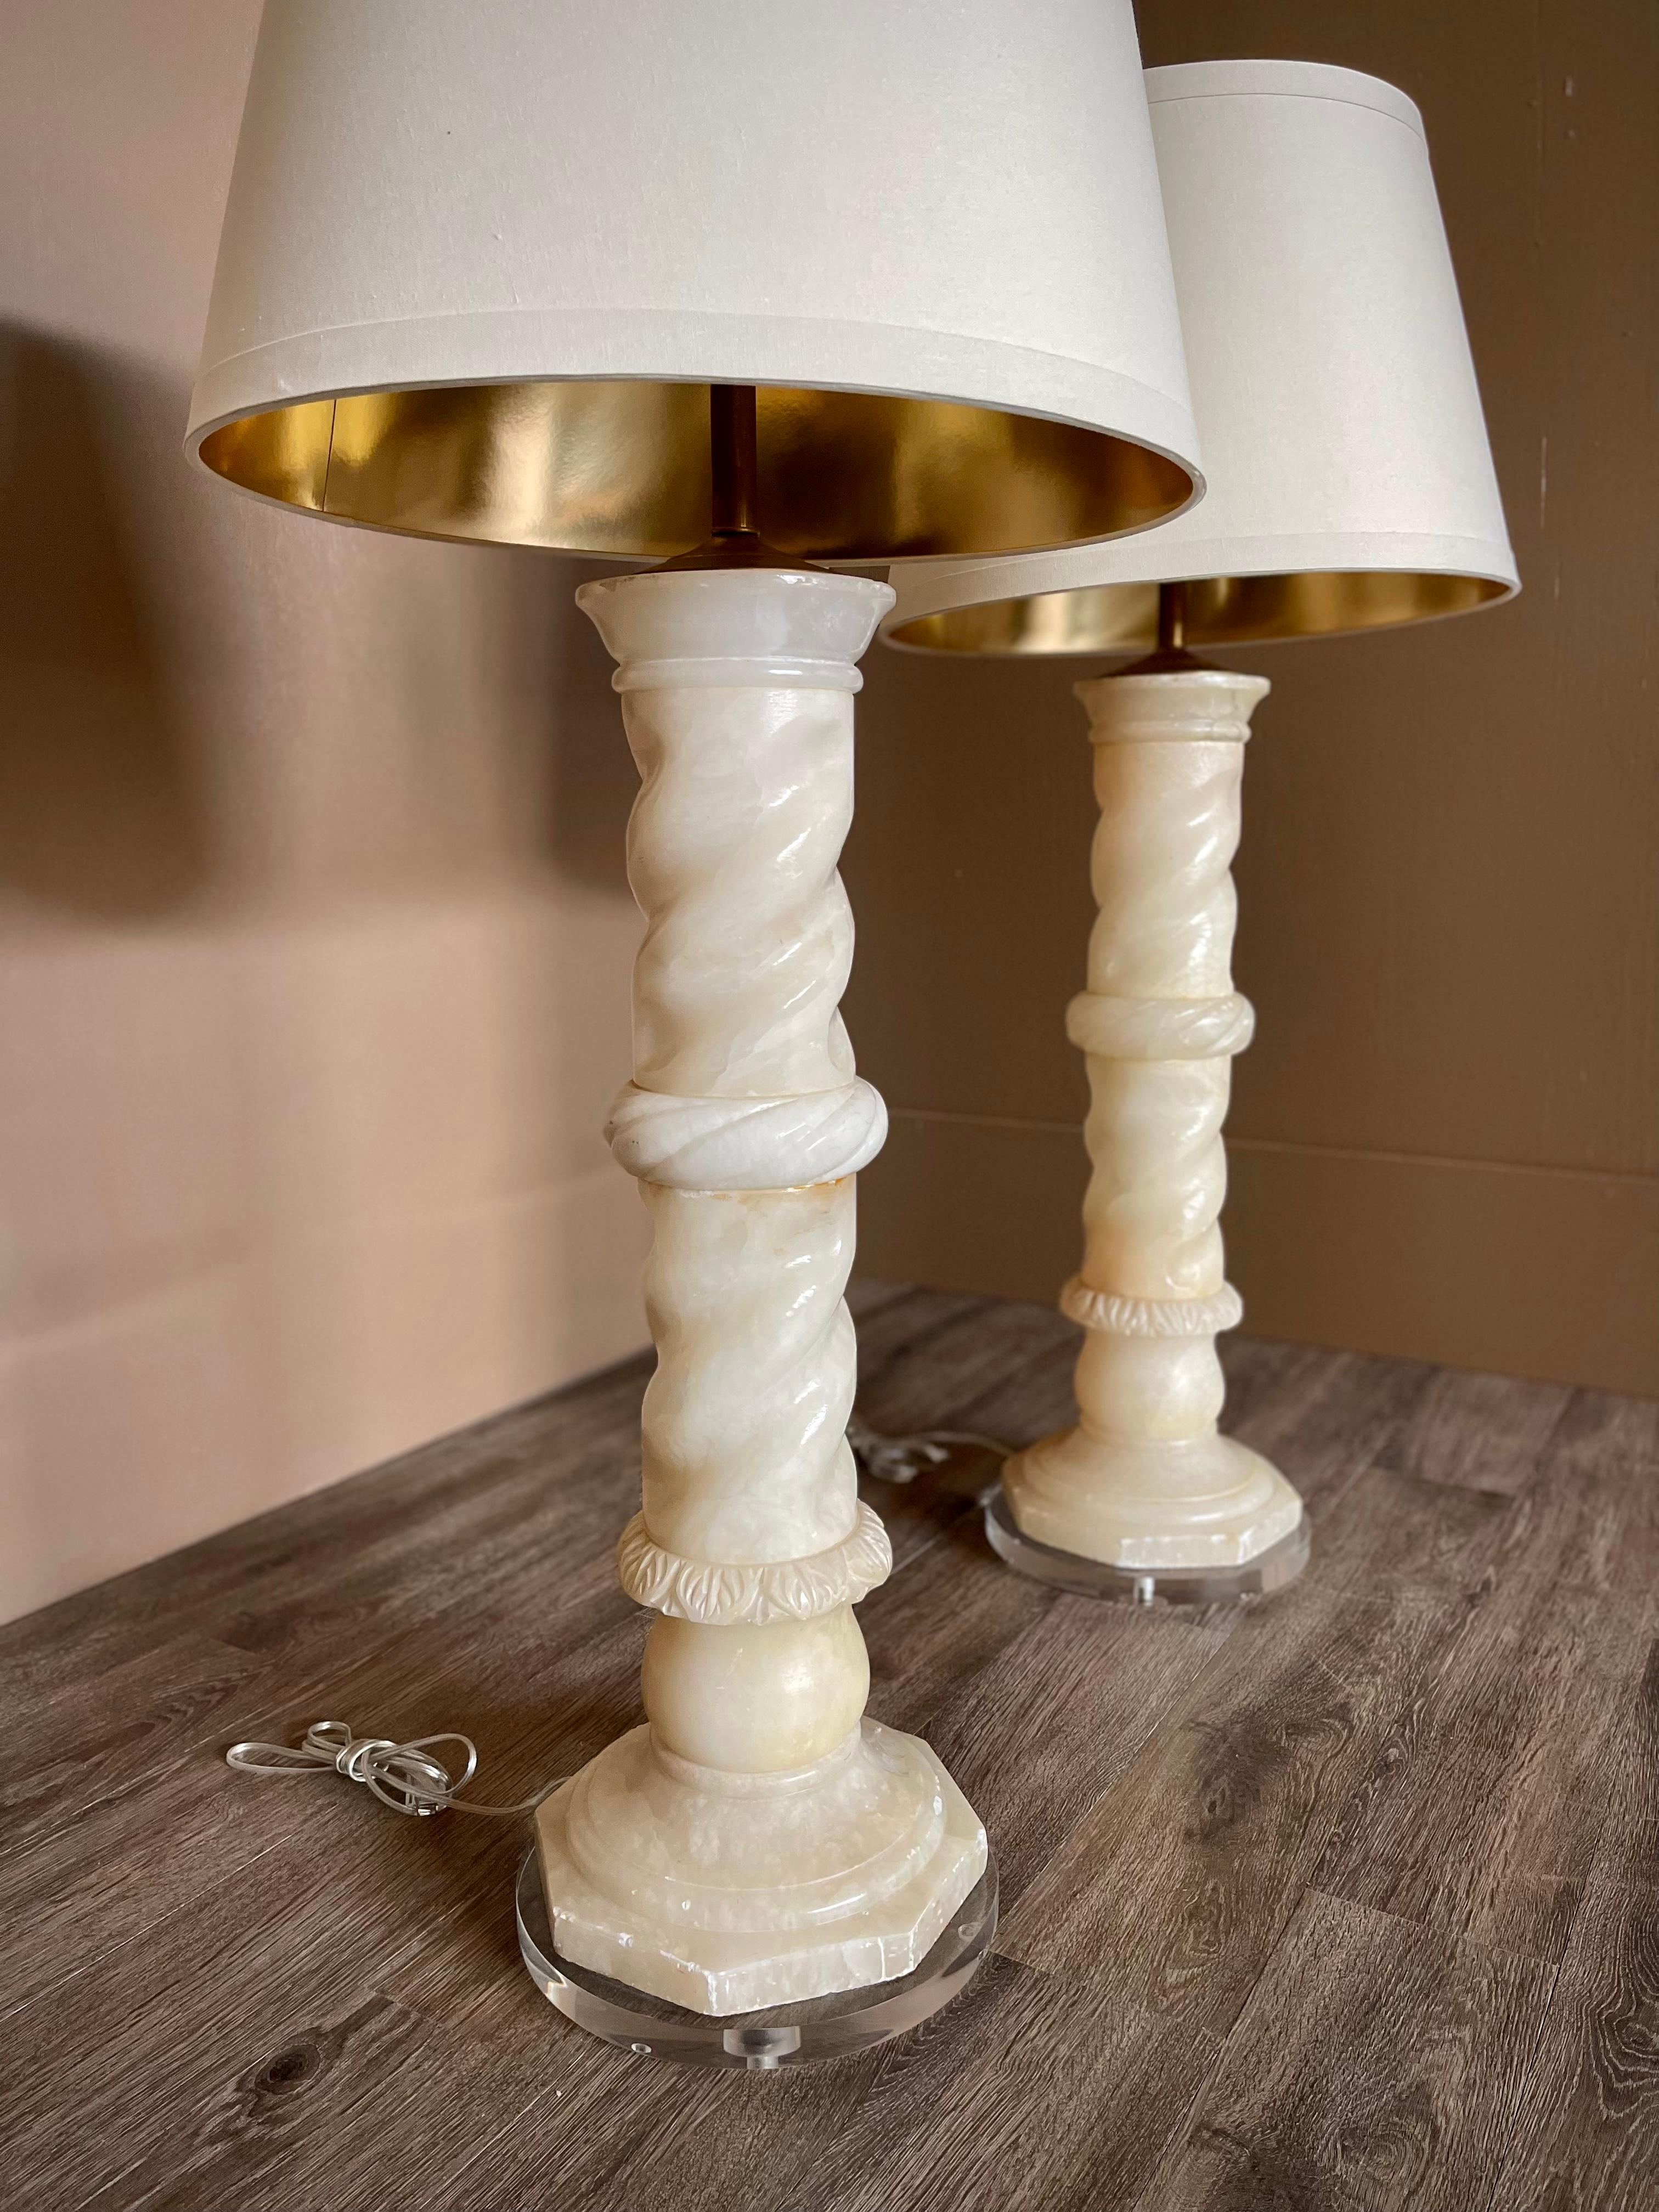 Pair Antique Italian Architectural Alabaster Lamps, Lucite Bases, Spiral Carved For Sale 2